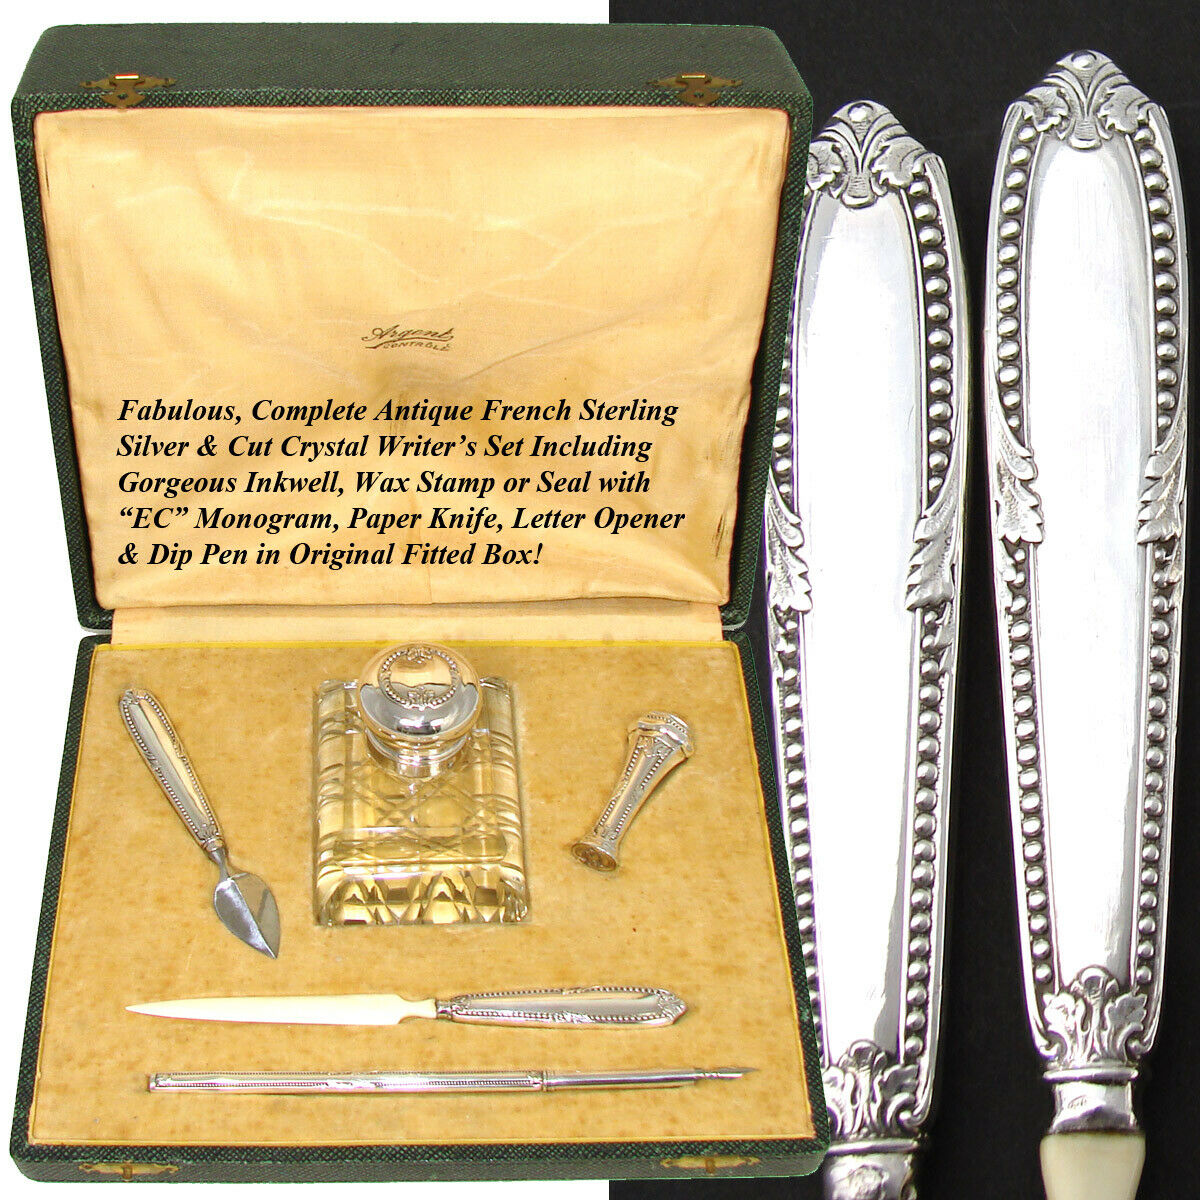 Sold at Auction: English Sterling Silver Dip Pen and Inkwell